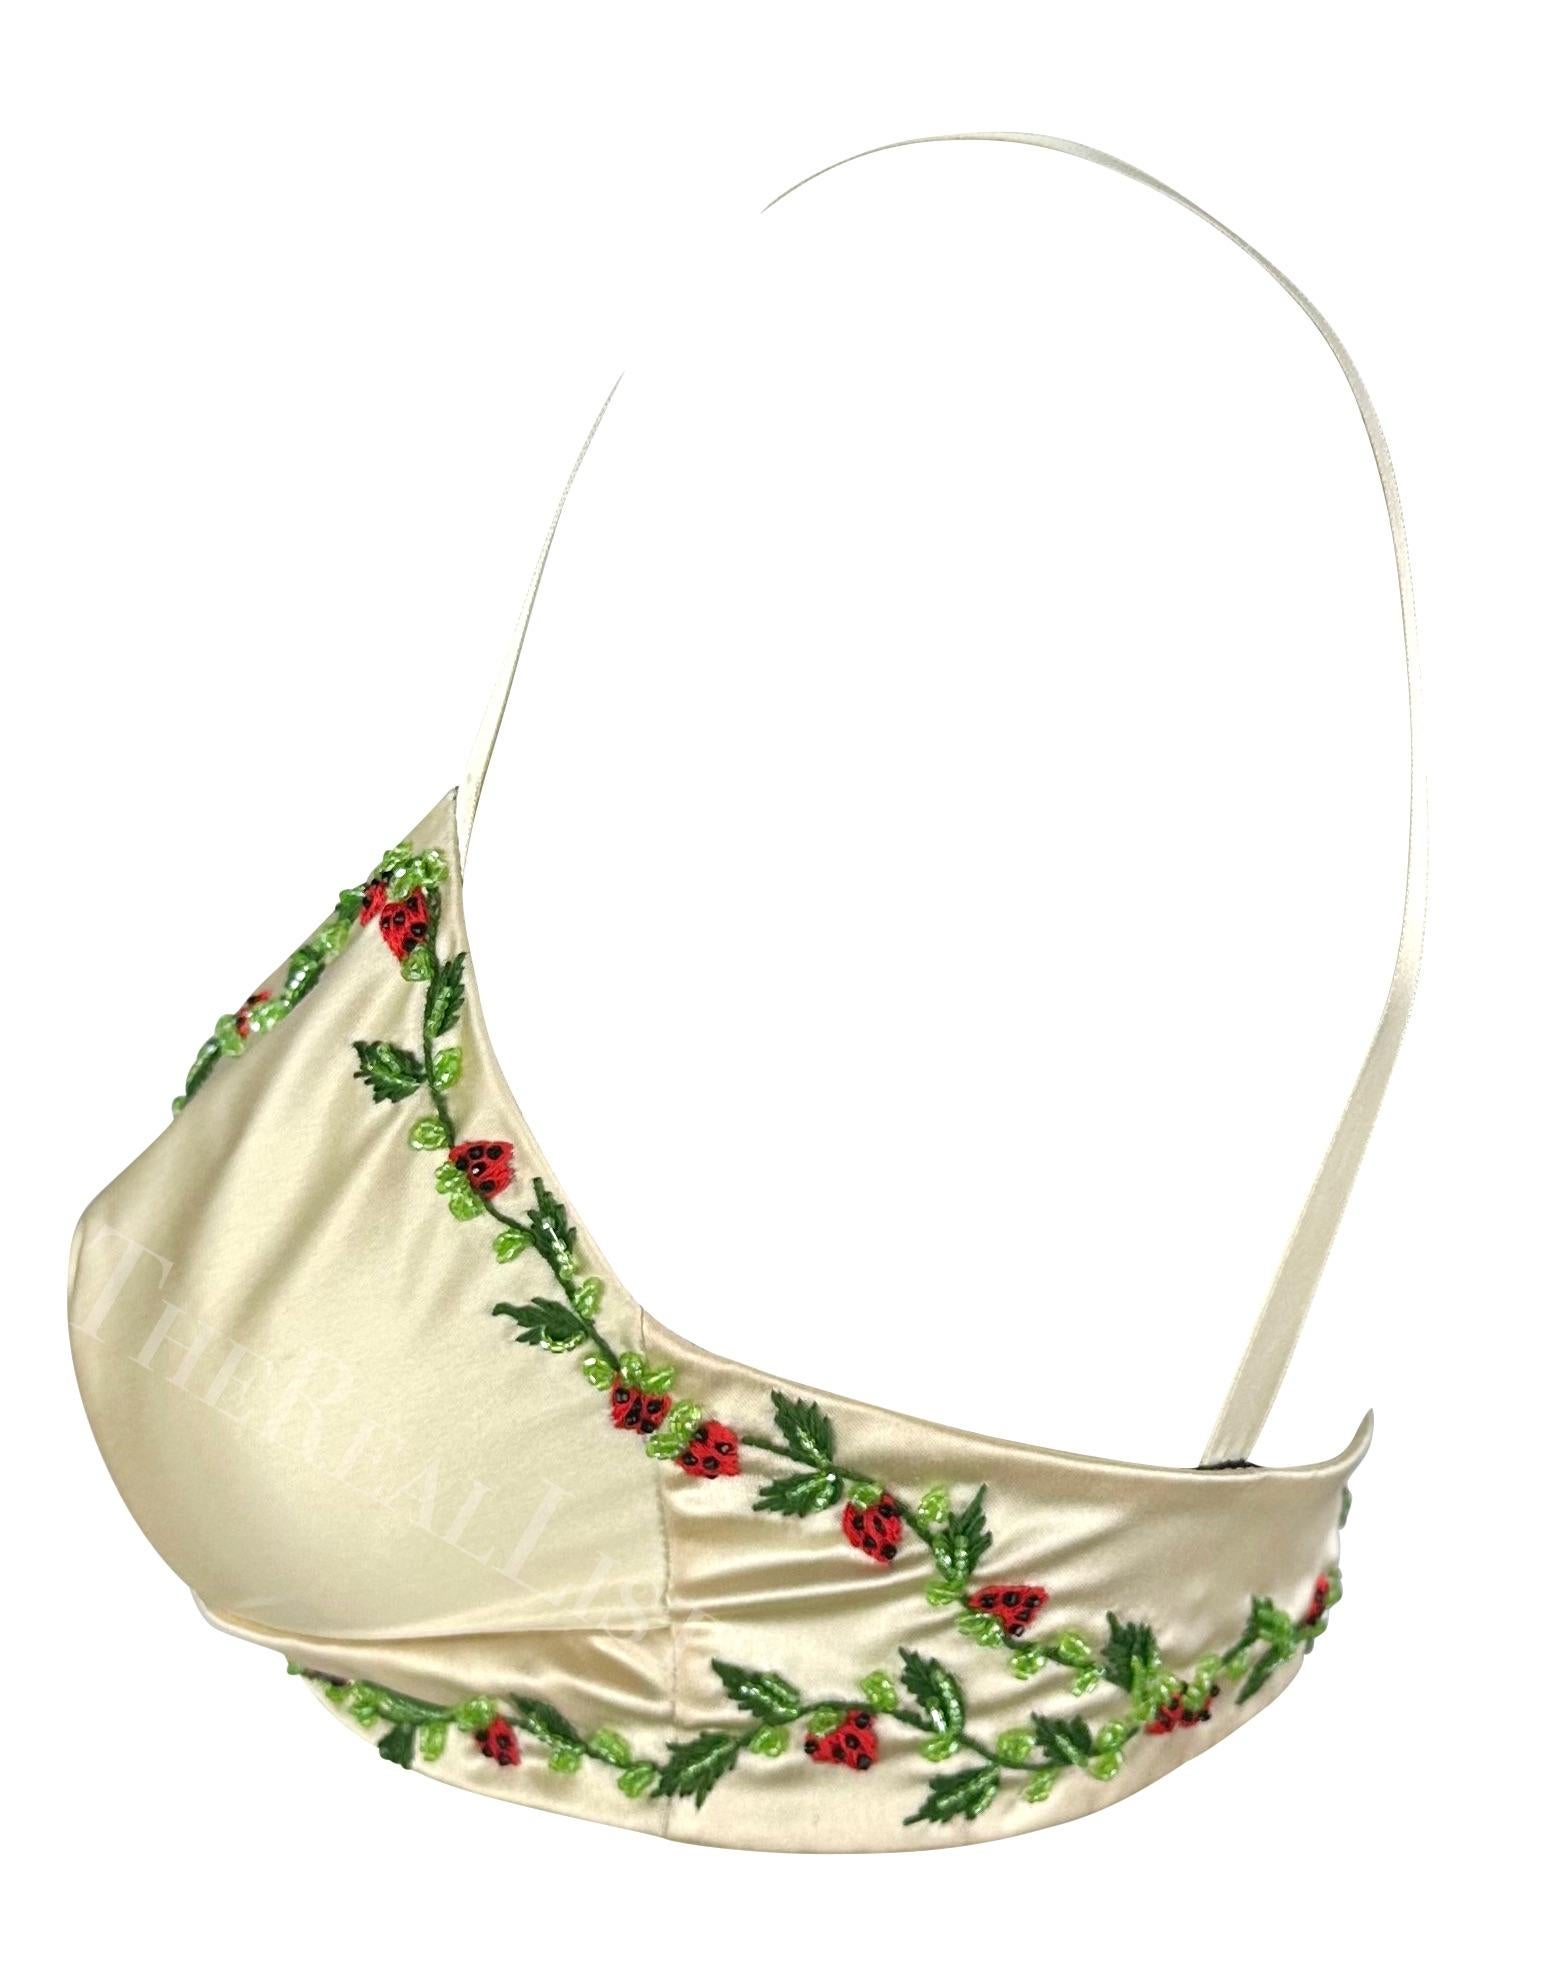 Presenting a stunning creme satin Dolce & Gabbana bralette. From the late 1990s, this fabulous bralette is constructed of shiny creme satin and is made complete with a beaded strawberry trim. Whether worn layered or by itself, this chic Dolce and